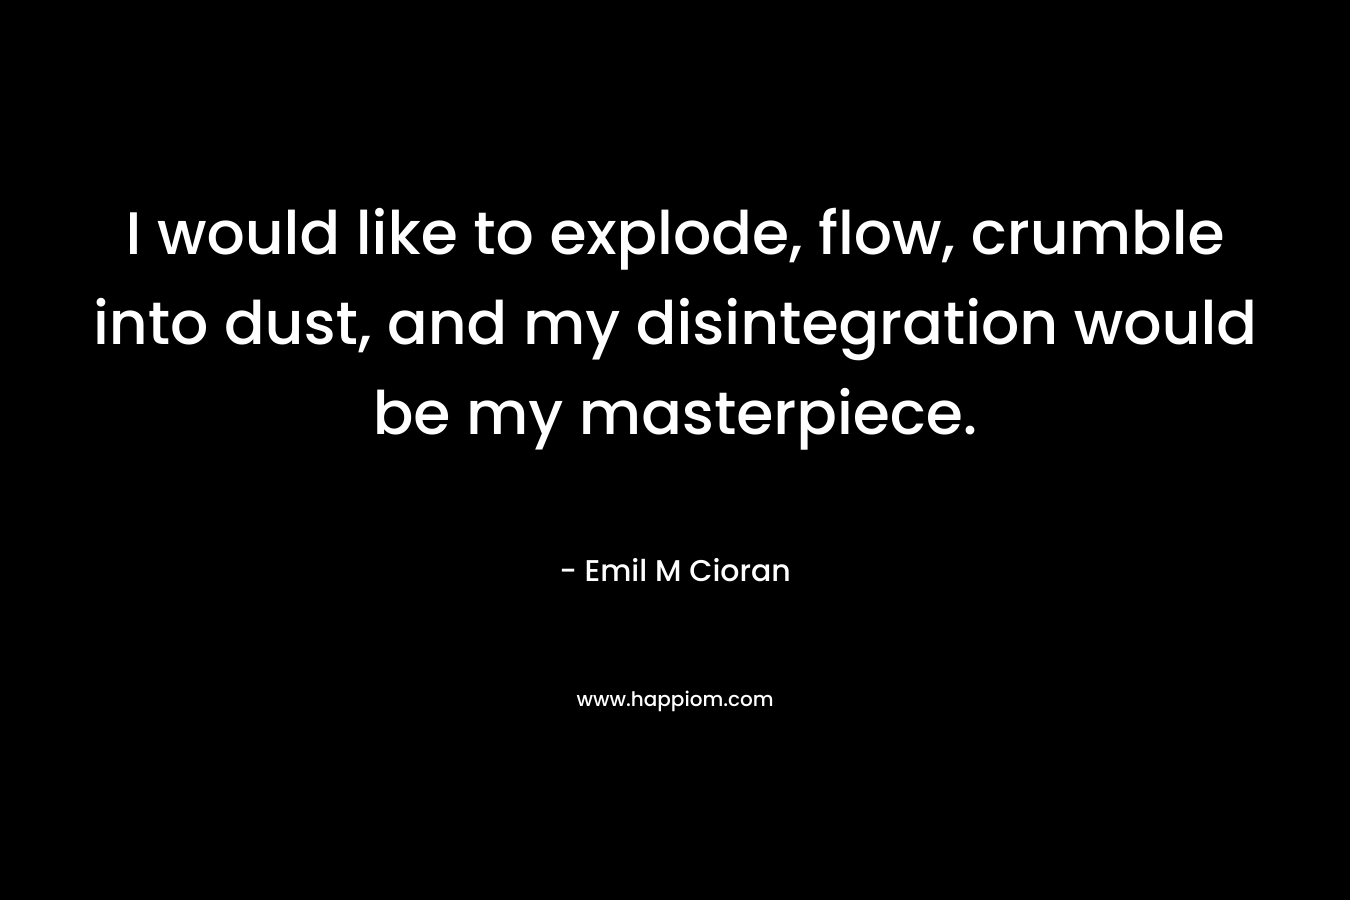 I would like to explode, flow, crumble into dust, and my disintegration would be my masterpiece. – Emil M Cioran